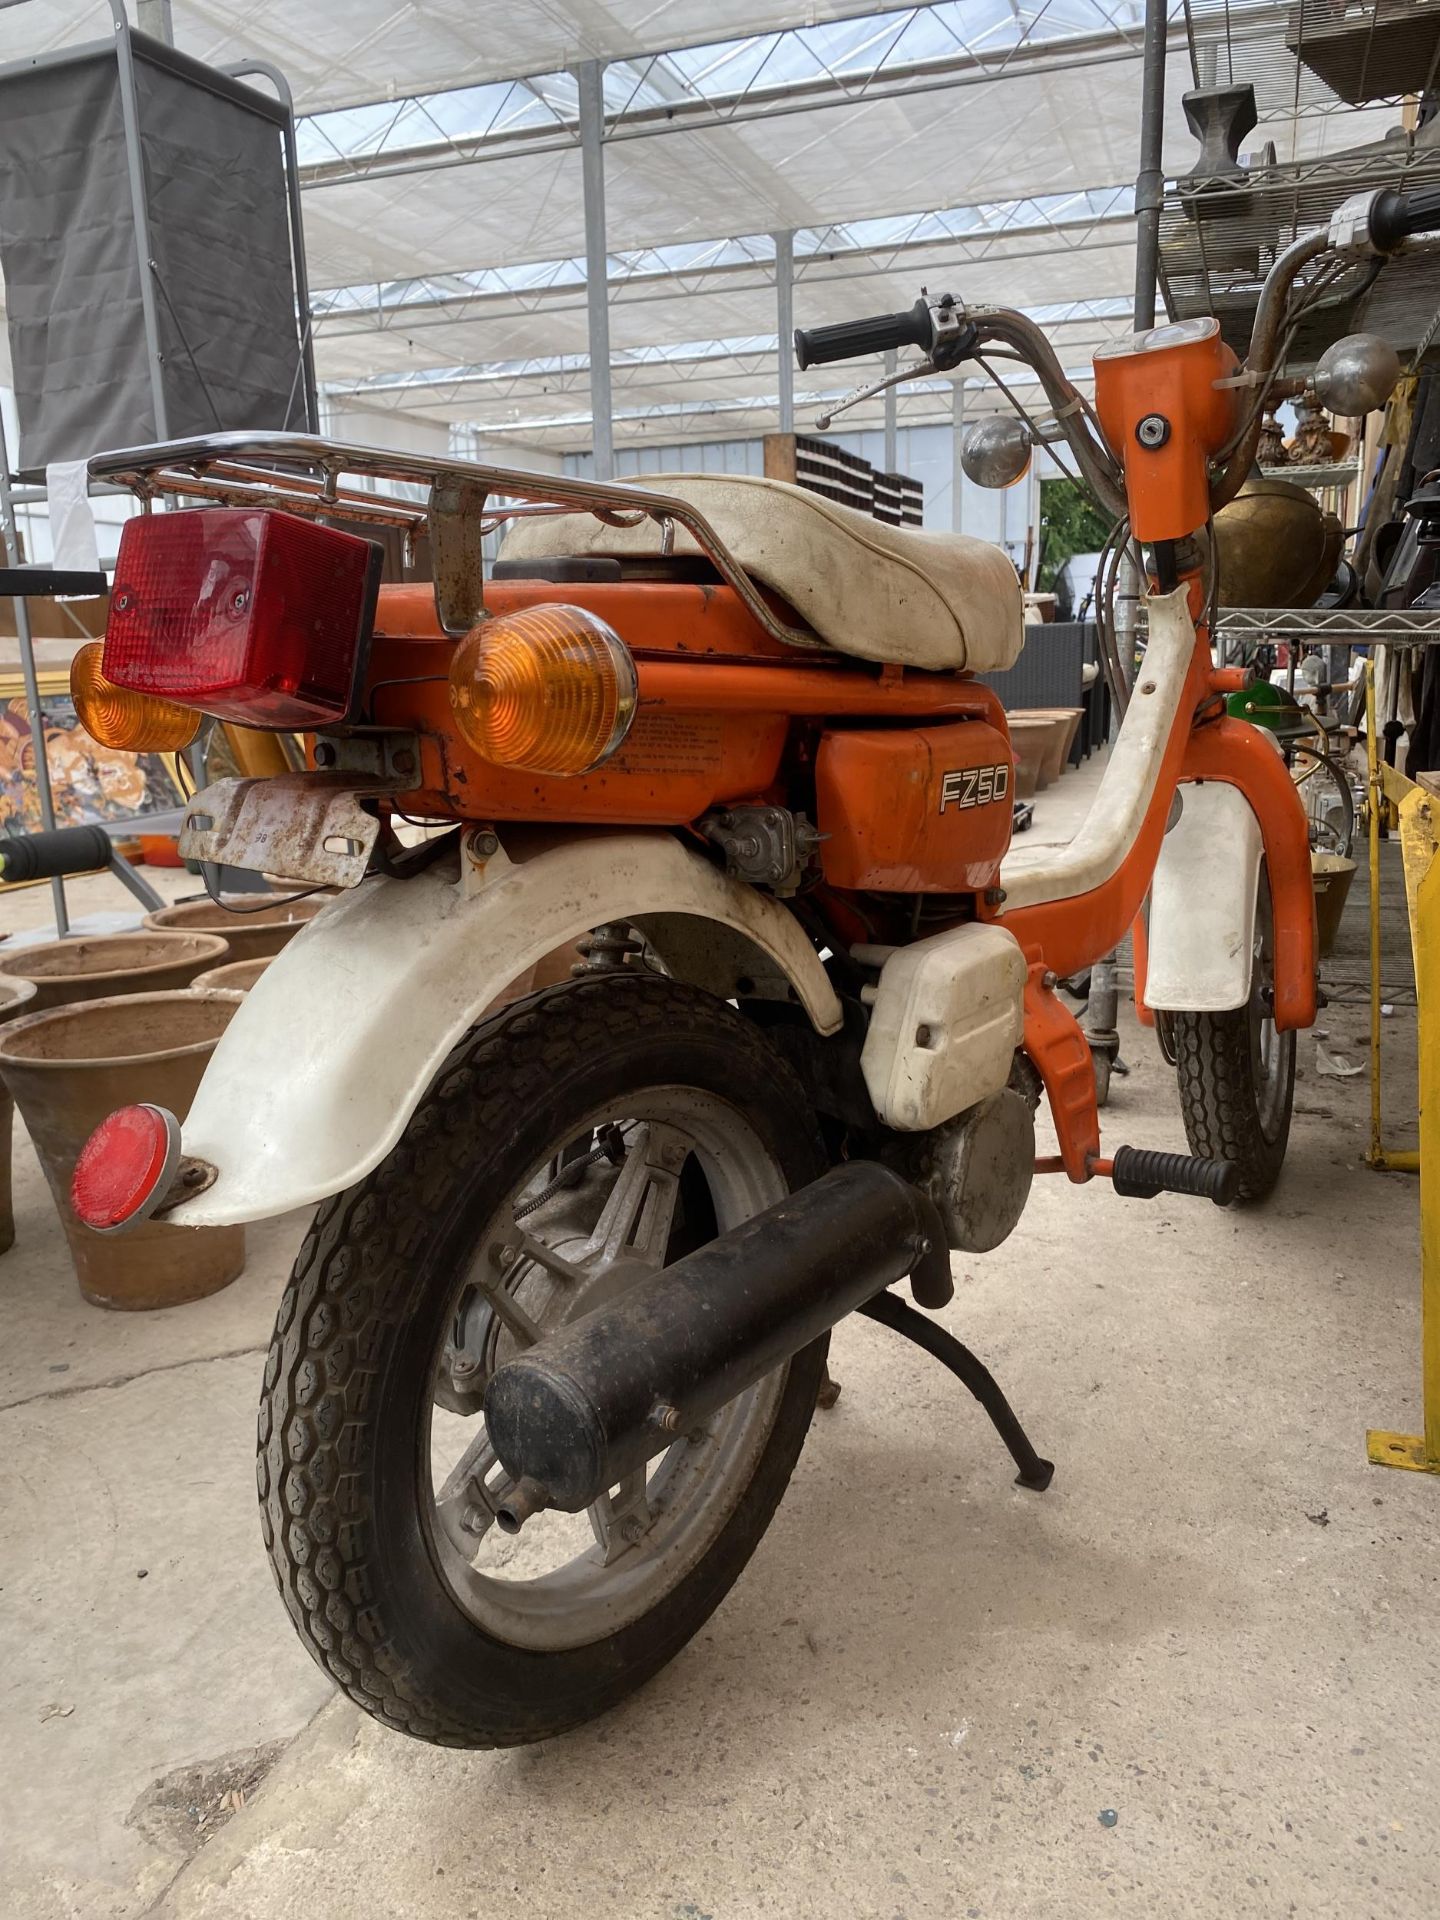 A FZ50 SUZUKI WITH LOG BOOK AND KEY,MILEAGE 611 MILES, REGISTRATION WNA 608X TO INCLUDE A HAND - Image 5 of 15